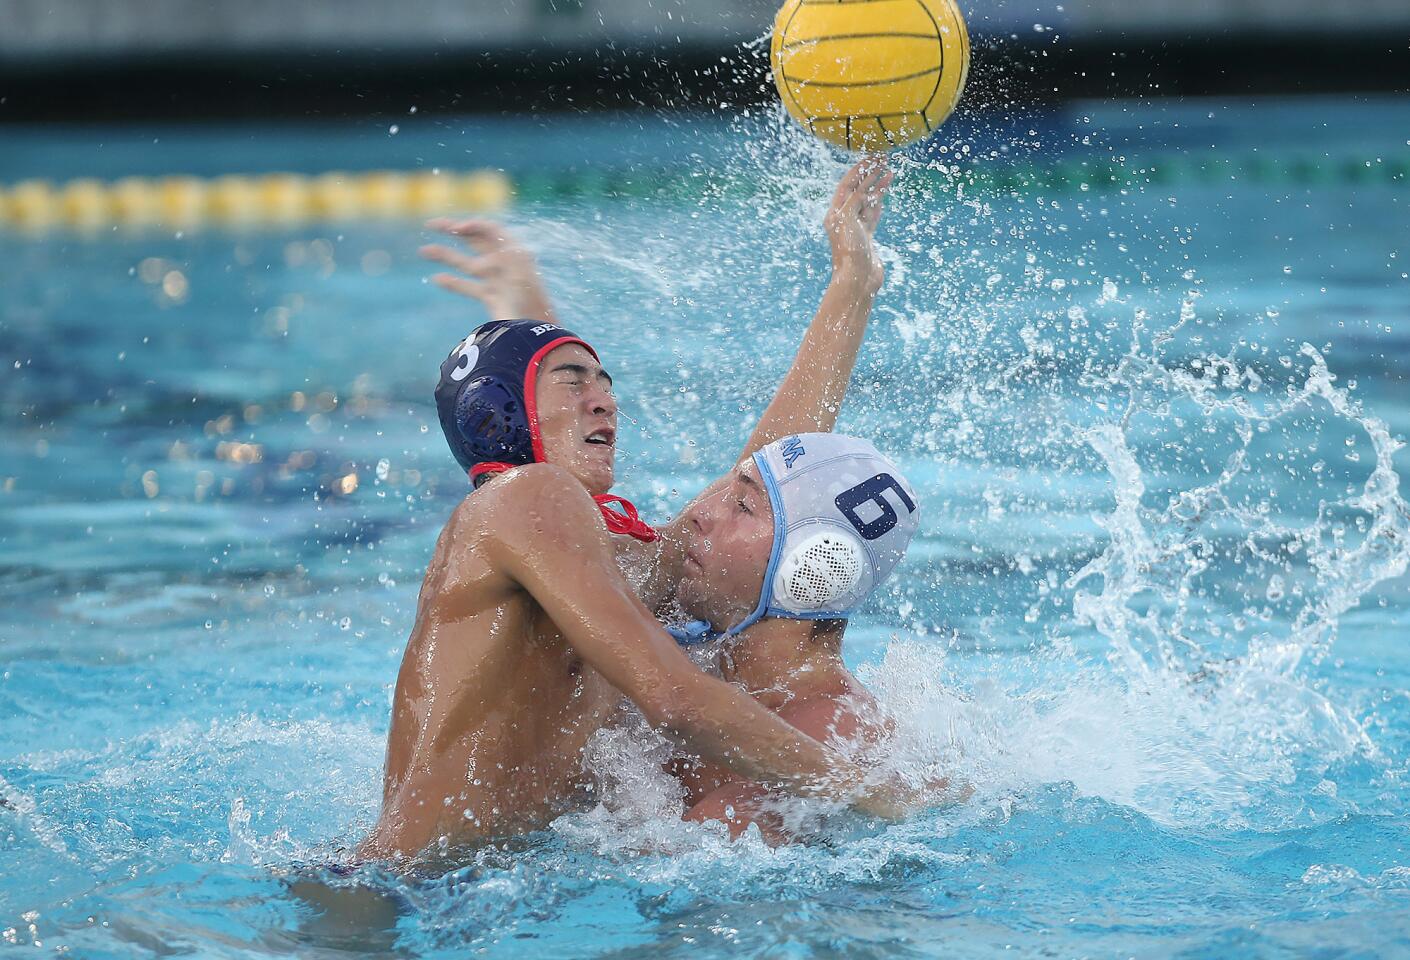 Beckman High's Keanu Pascual (3) lunges to block a shot by Corona Del Mar High's Matt Ueberroth in front of the net during wild-card round of the CIF Southern Section Division 2 playoffs at Beckman on Tuesday.